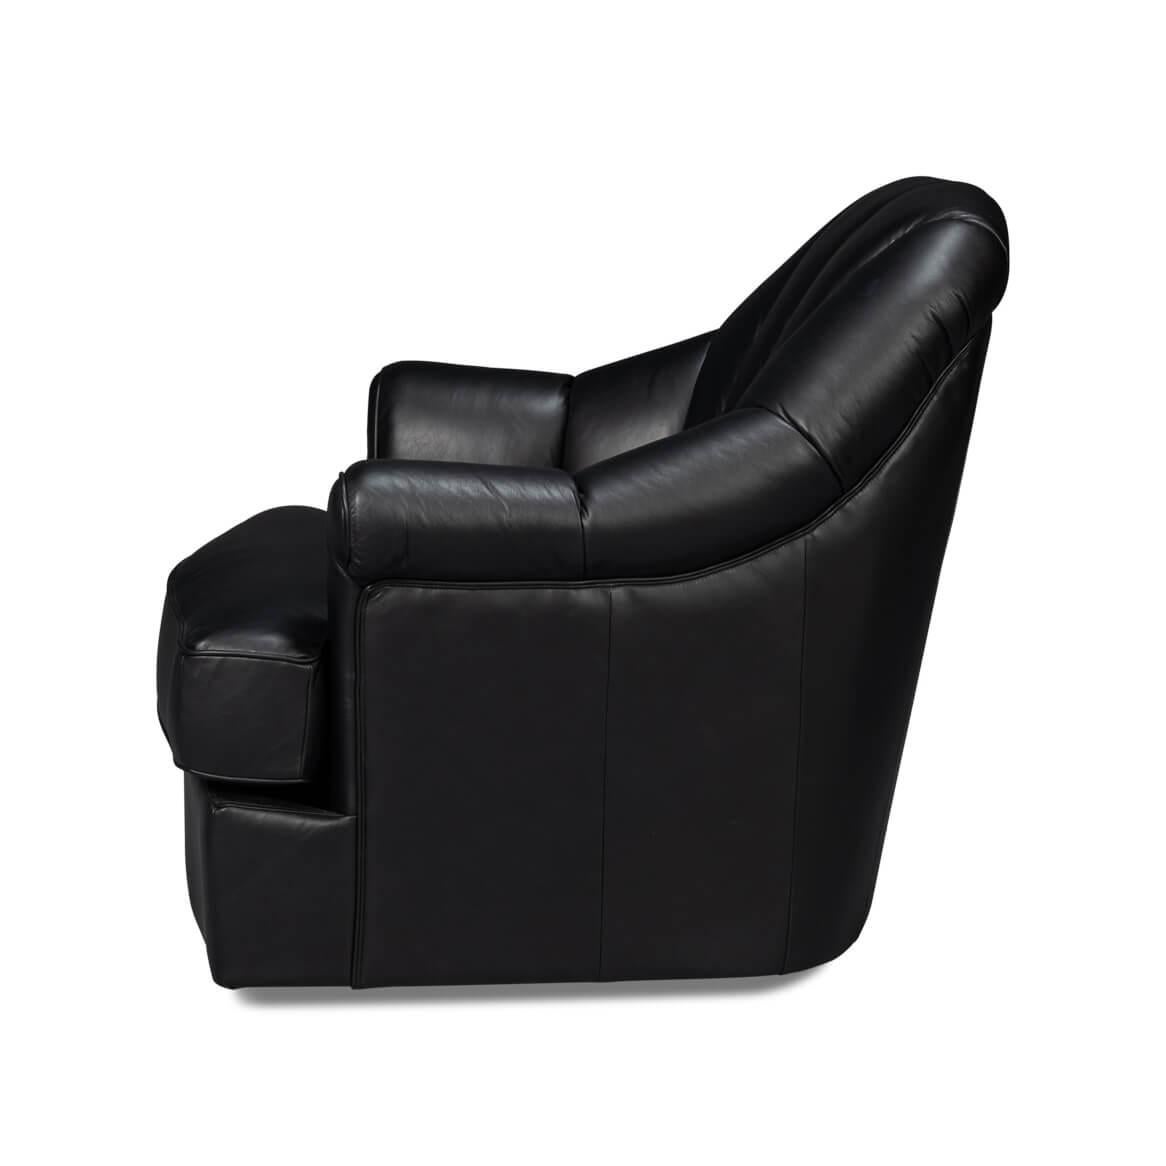 American Classical Black Leather Swivel Chair For Sale